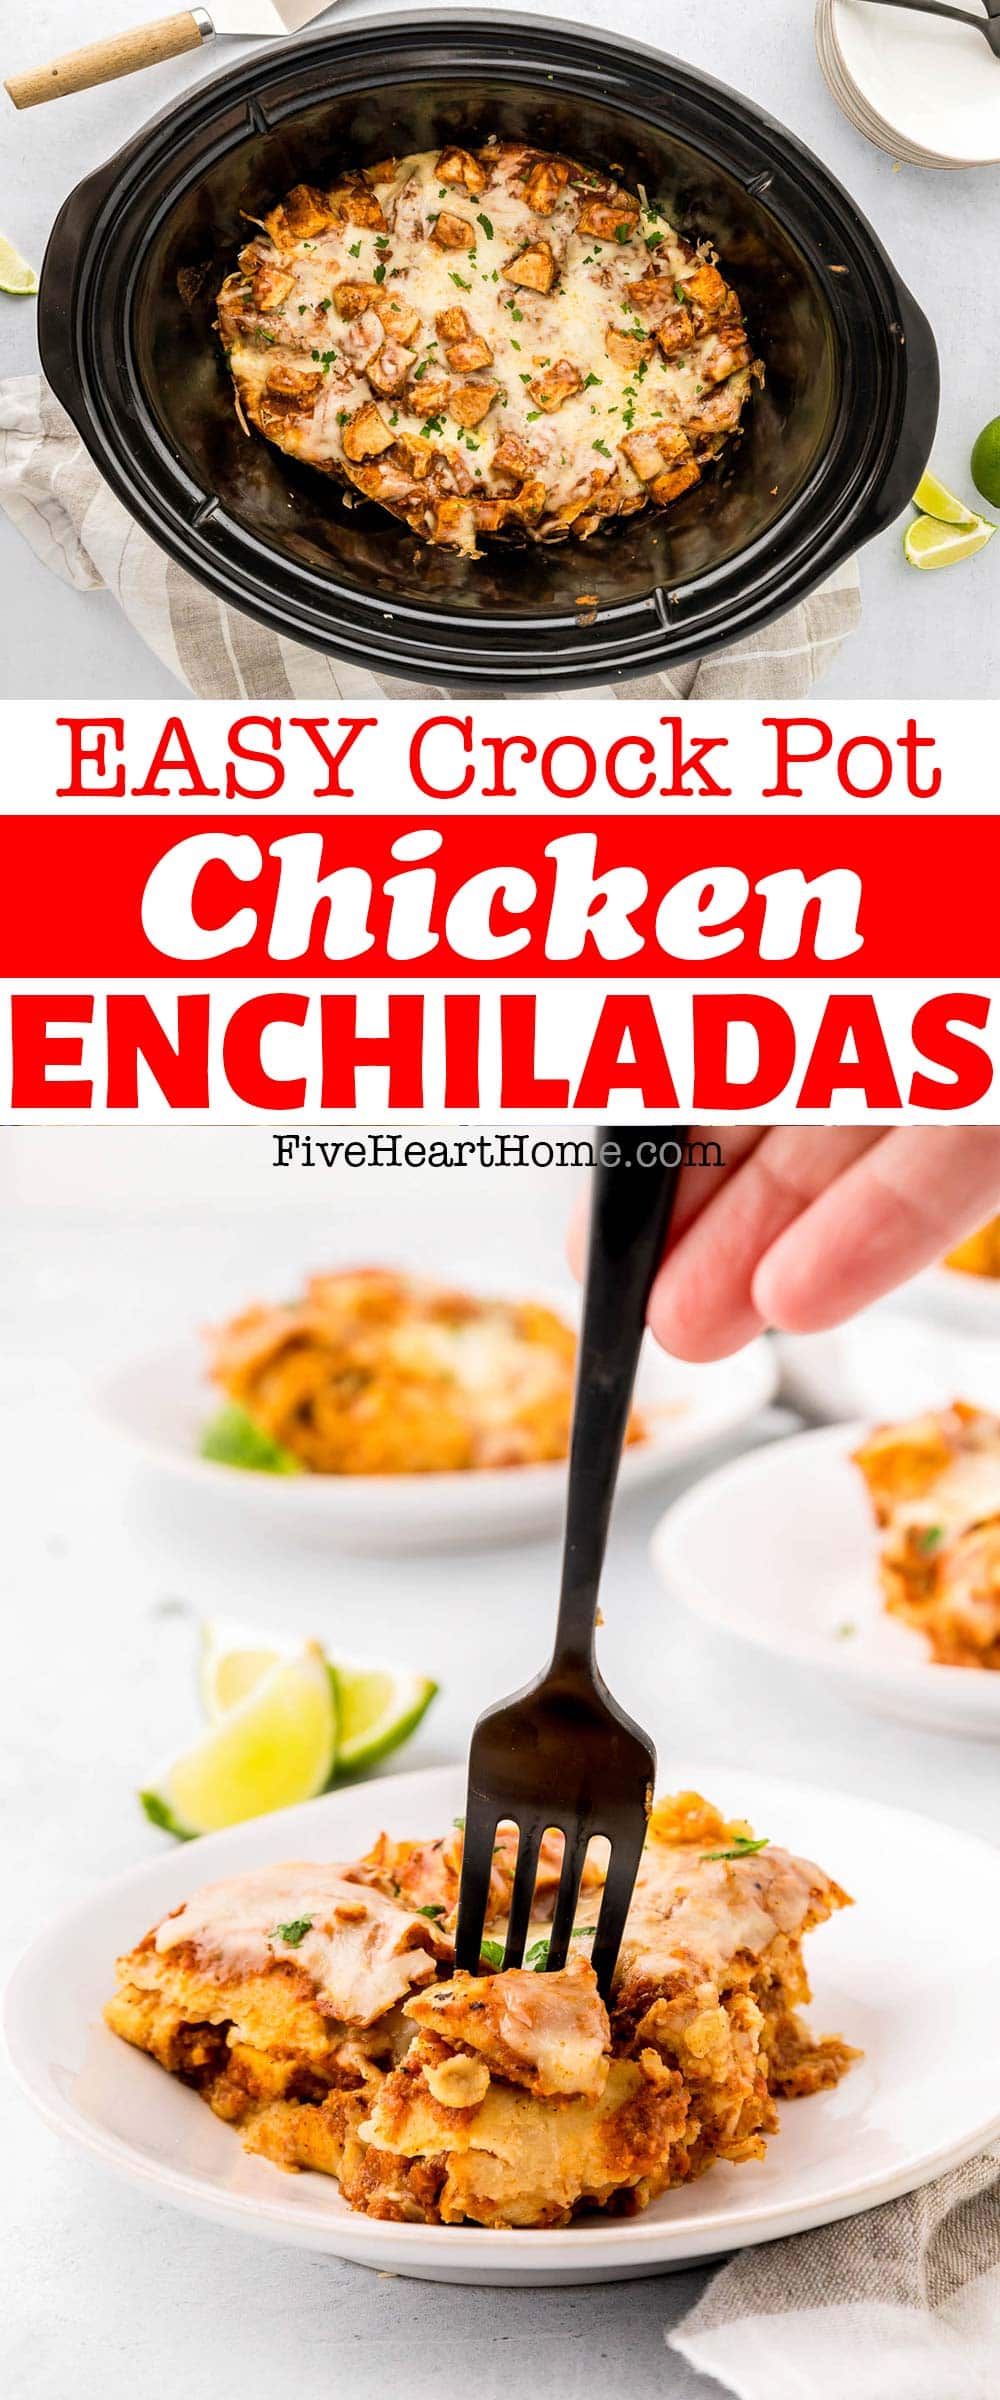 Crock Pot Chicken Enchiladas ~ flavorful and from-scratch, this stacked chicken enchilada casserole is quick to assemble and easy to make in the slow cooker! | FiveHeartHome.com via @fivehearthome